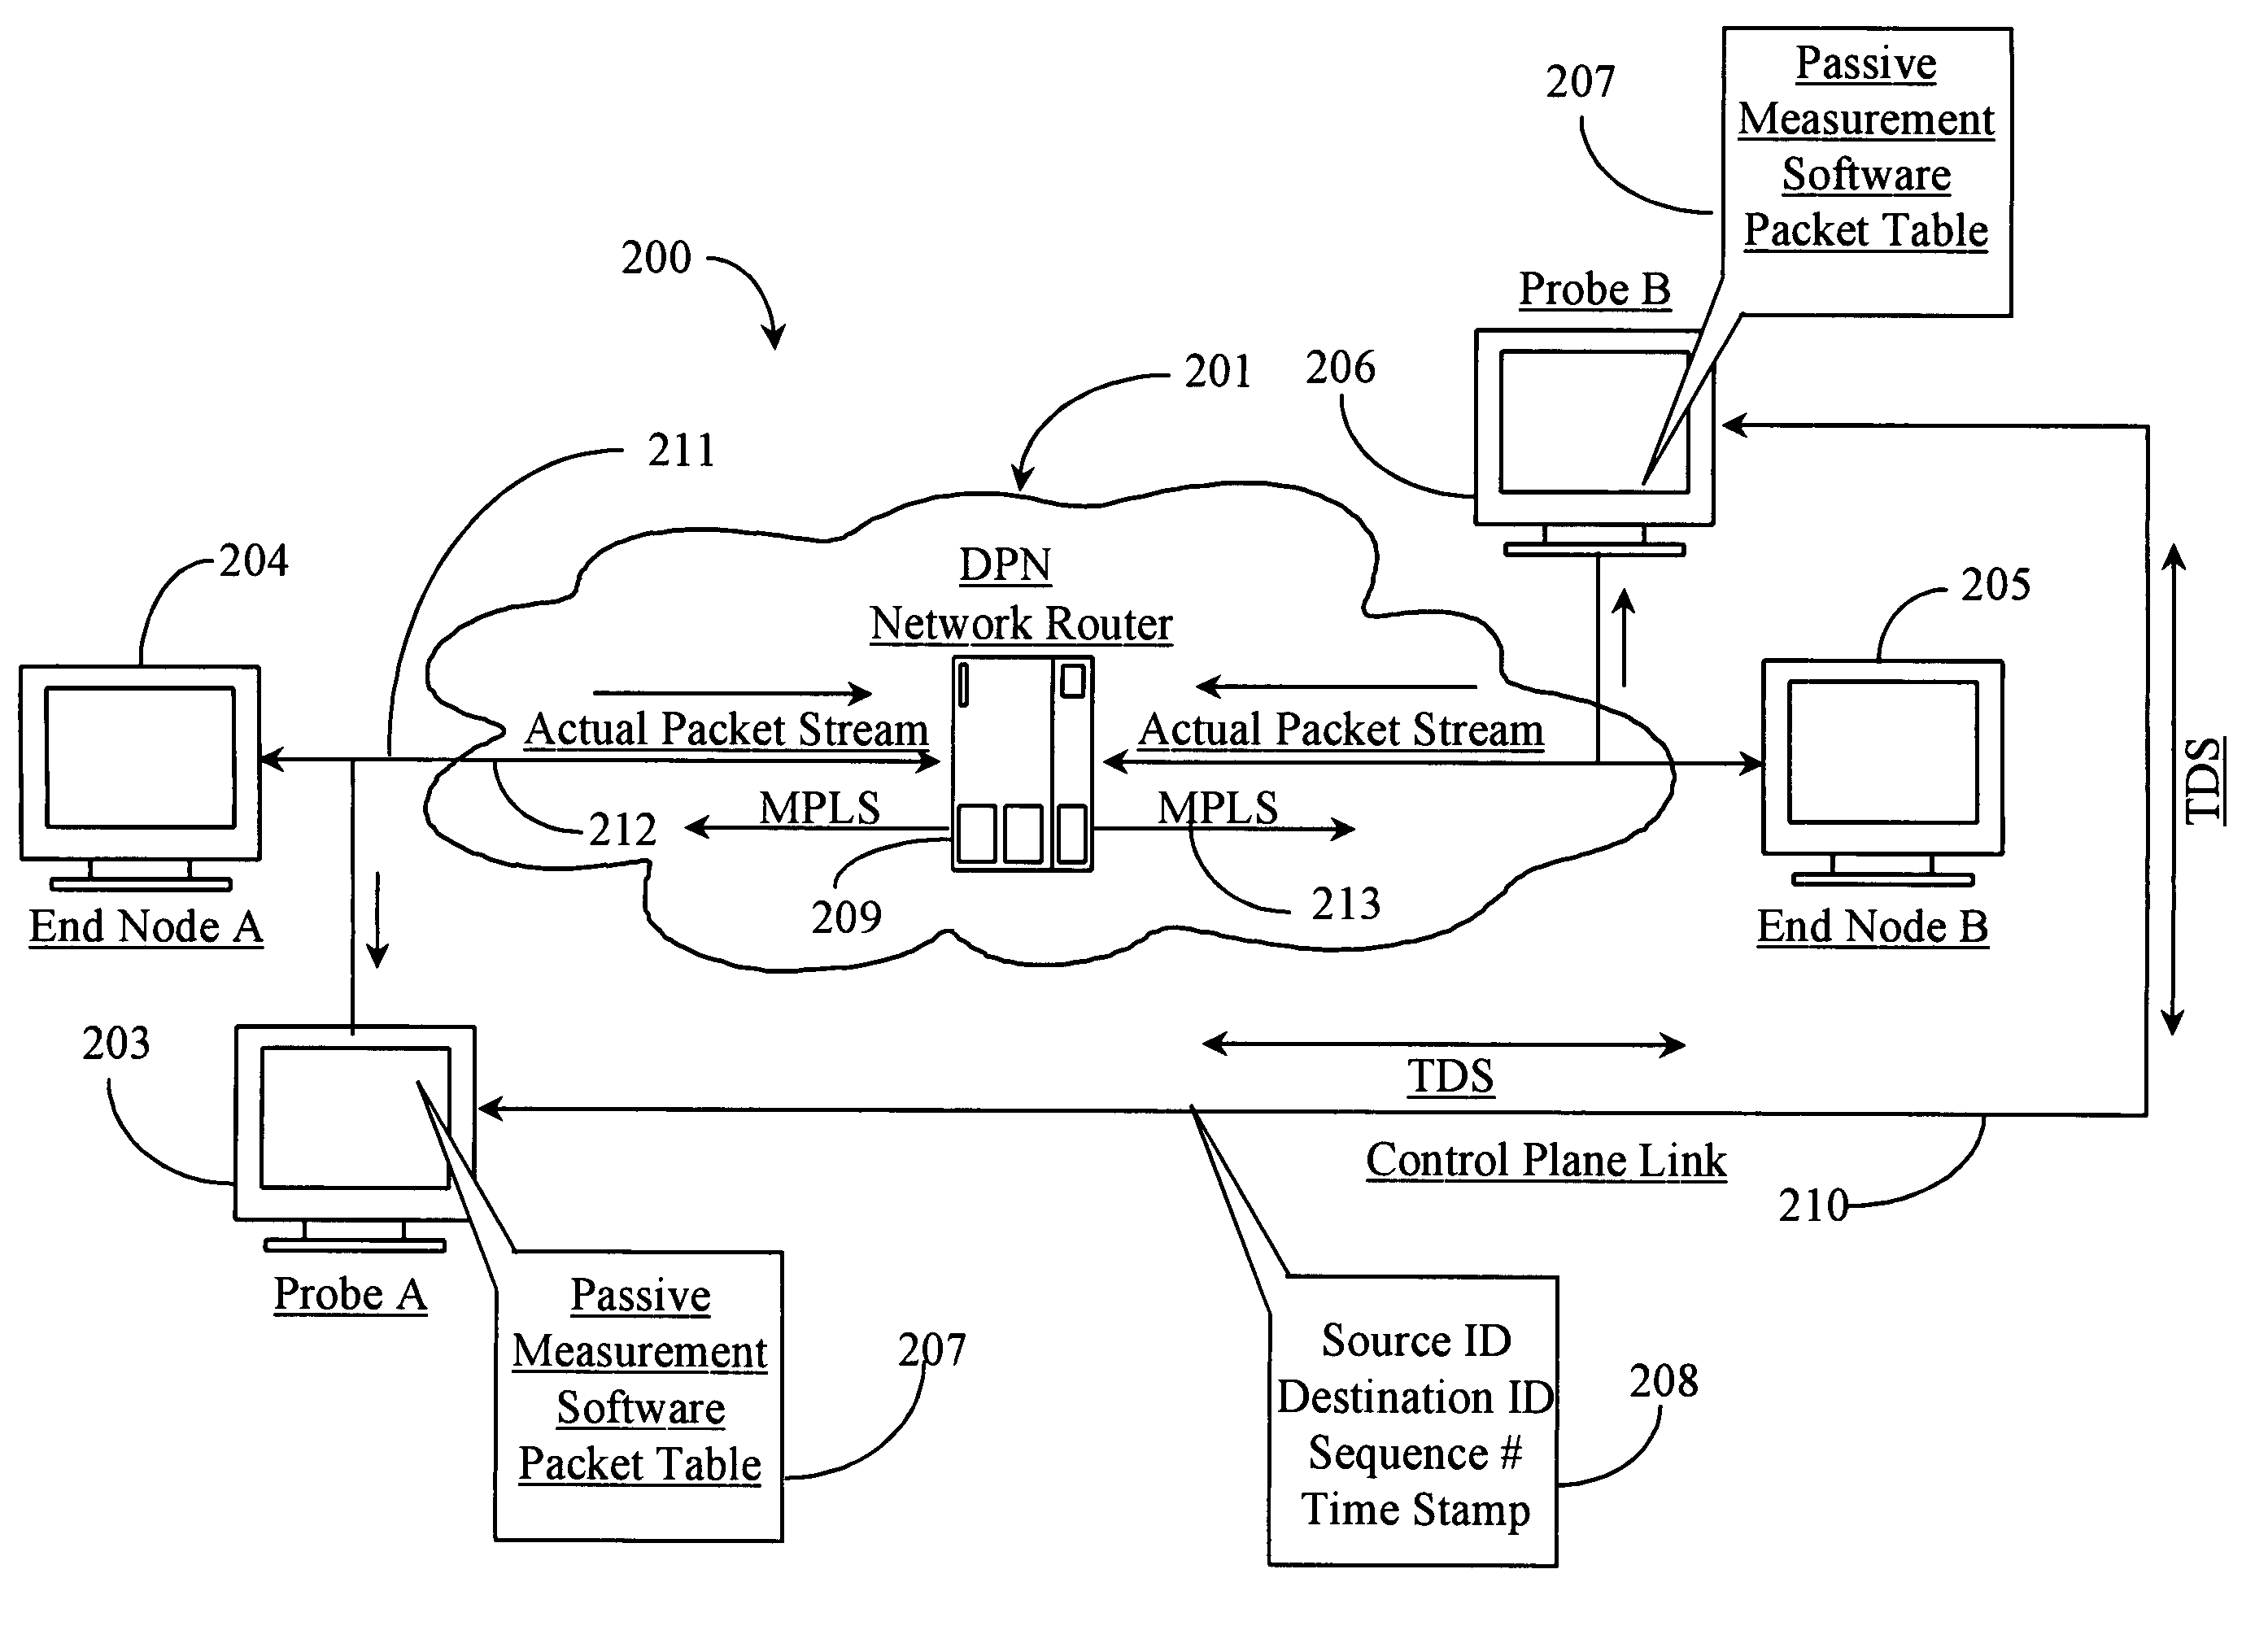 Method and apparatus for monitoring latency, jitter, packet throughput and packet loss ratio between two points on a network